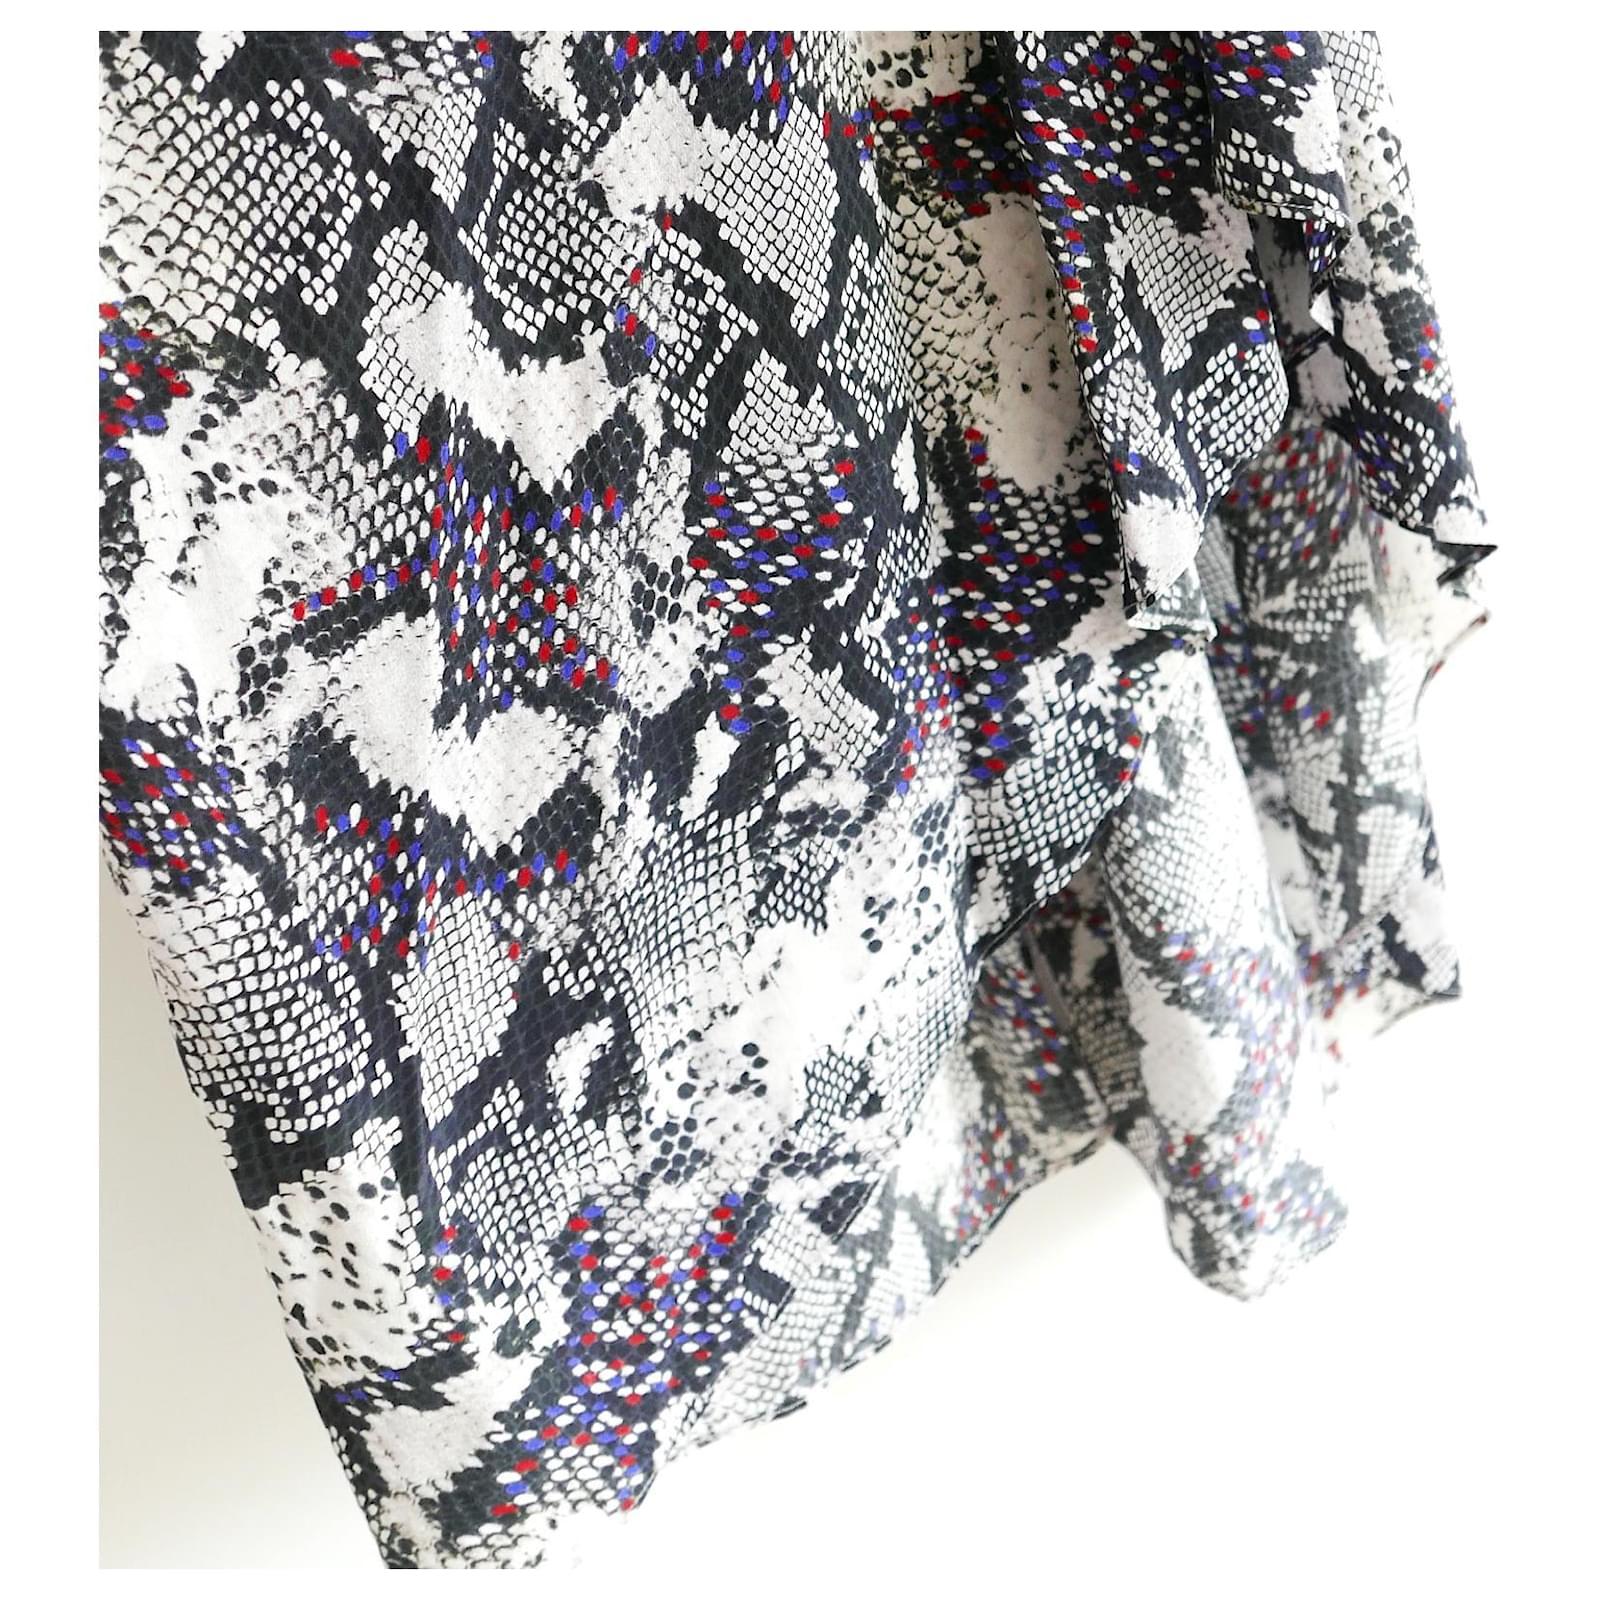 Signature Isabel Marant Albini dress - bought for £1100 and worn once. Made from soft black and chalk snakeskin print silk with splashes of navy blue and red throughout. It has a super flattering cut with soft fit over the bust, ruched front, v neck